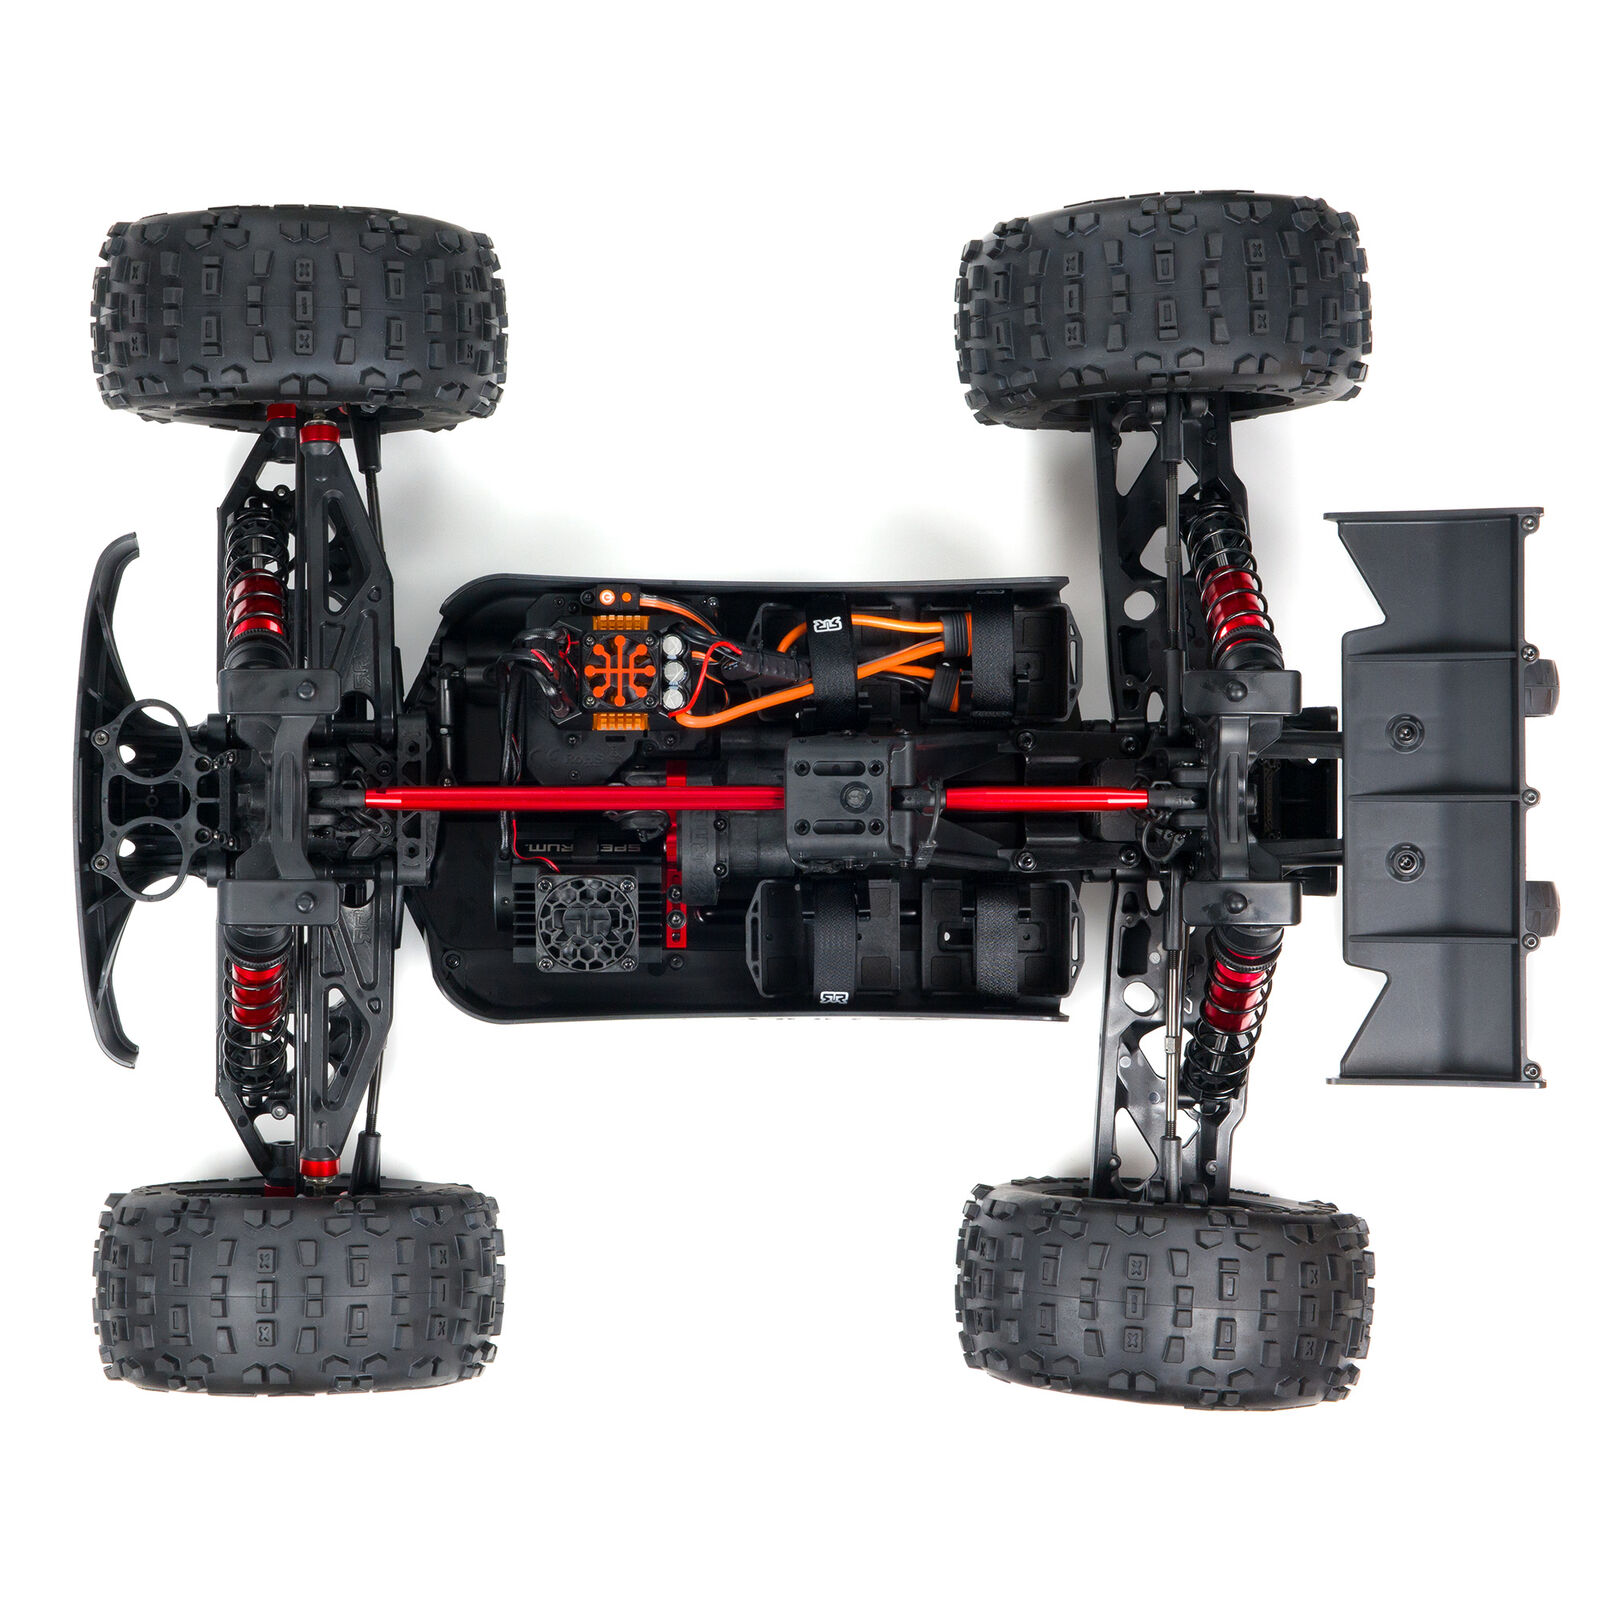 Automodel Arrma 1/5 OUTCAST 4WD 8S BLX Stunt Truck RTR Brushless